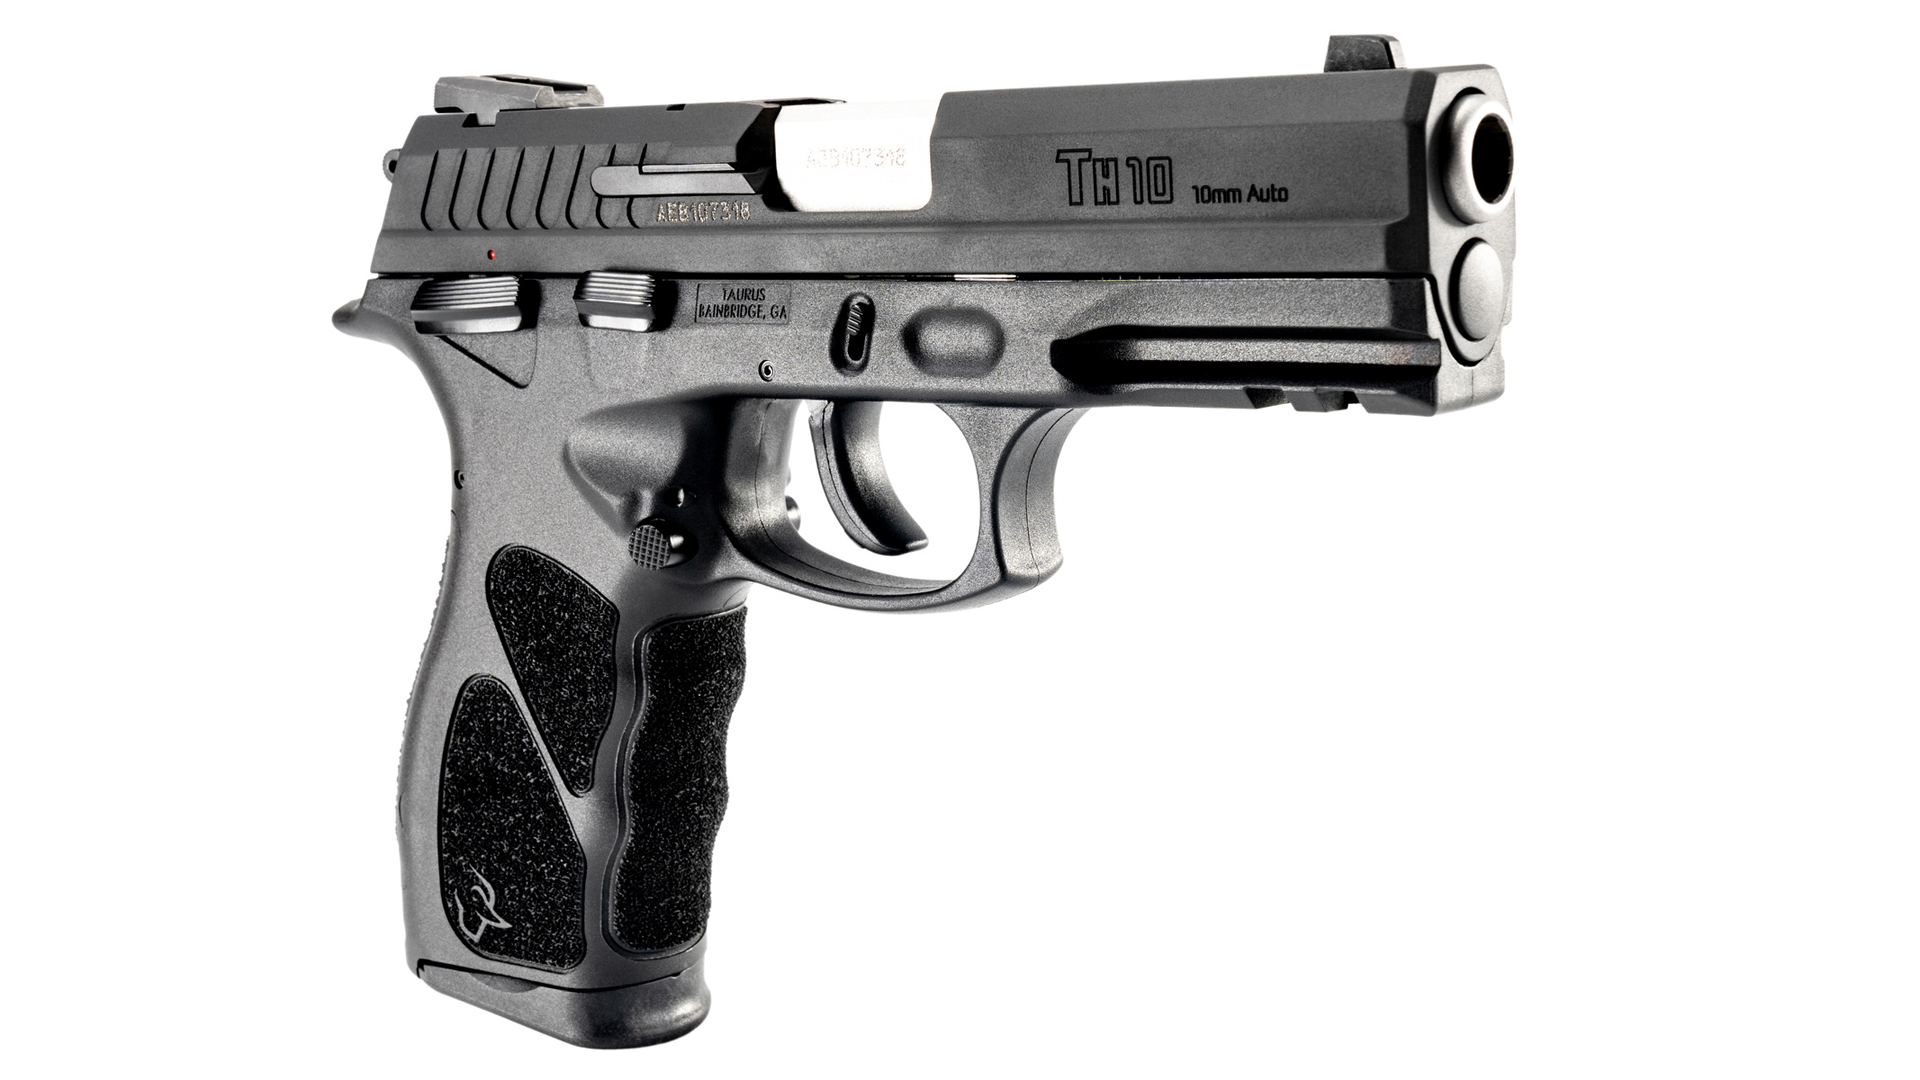 Right side of the Taurus TH10 pistol.